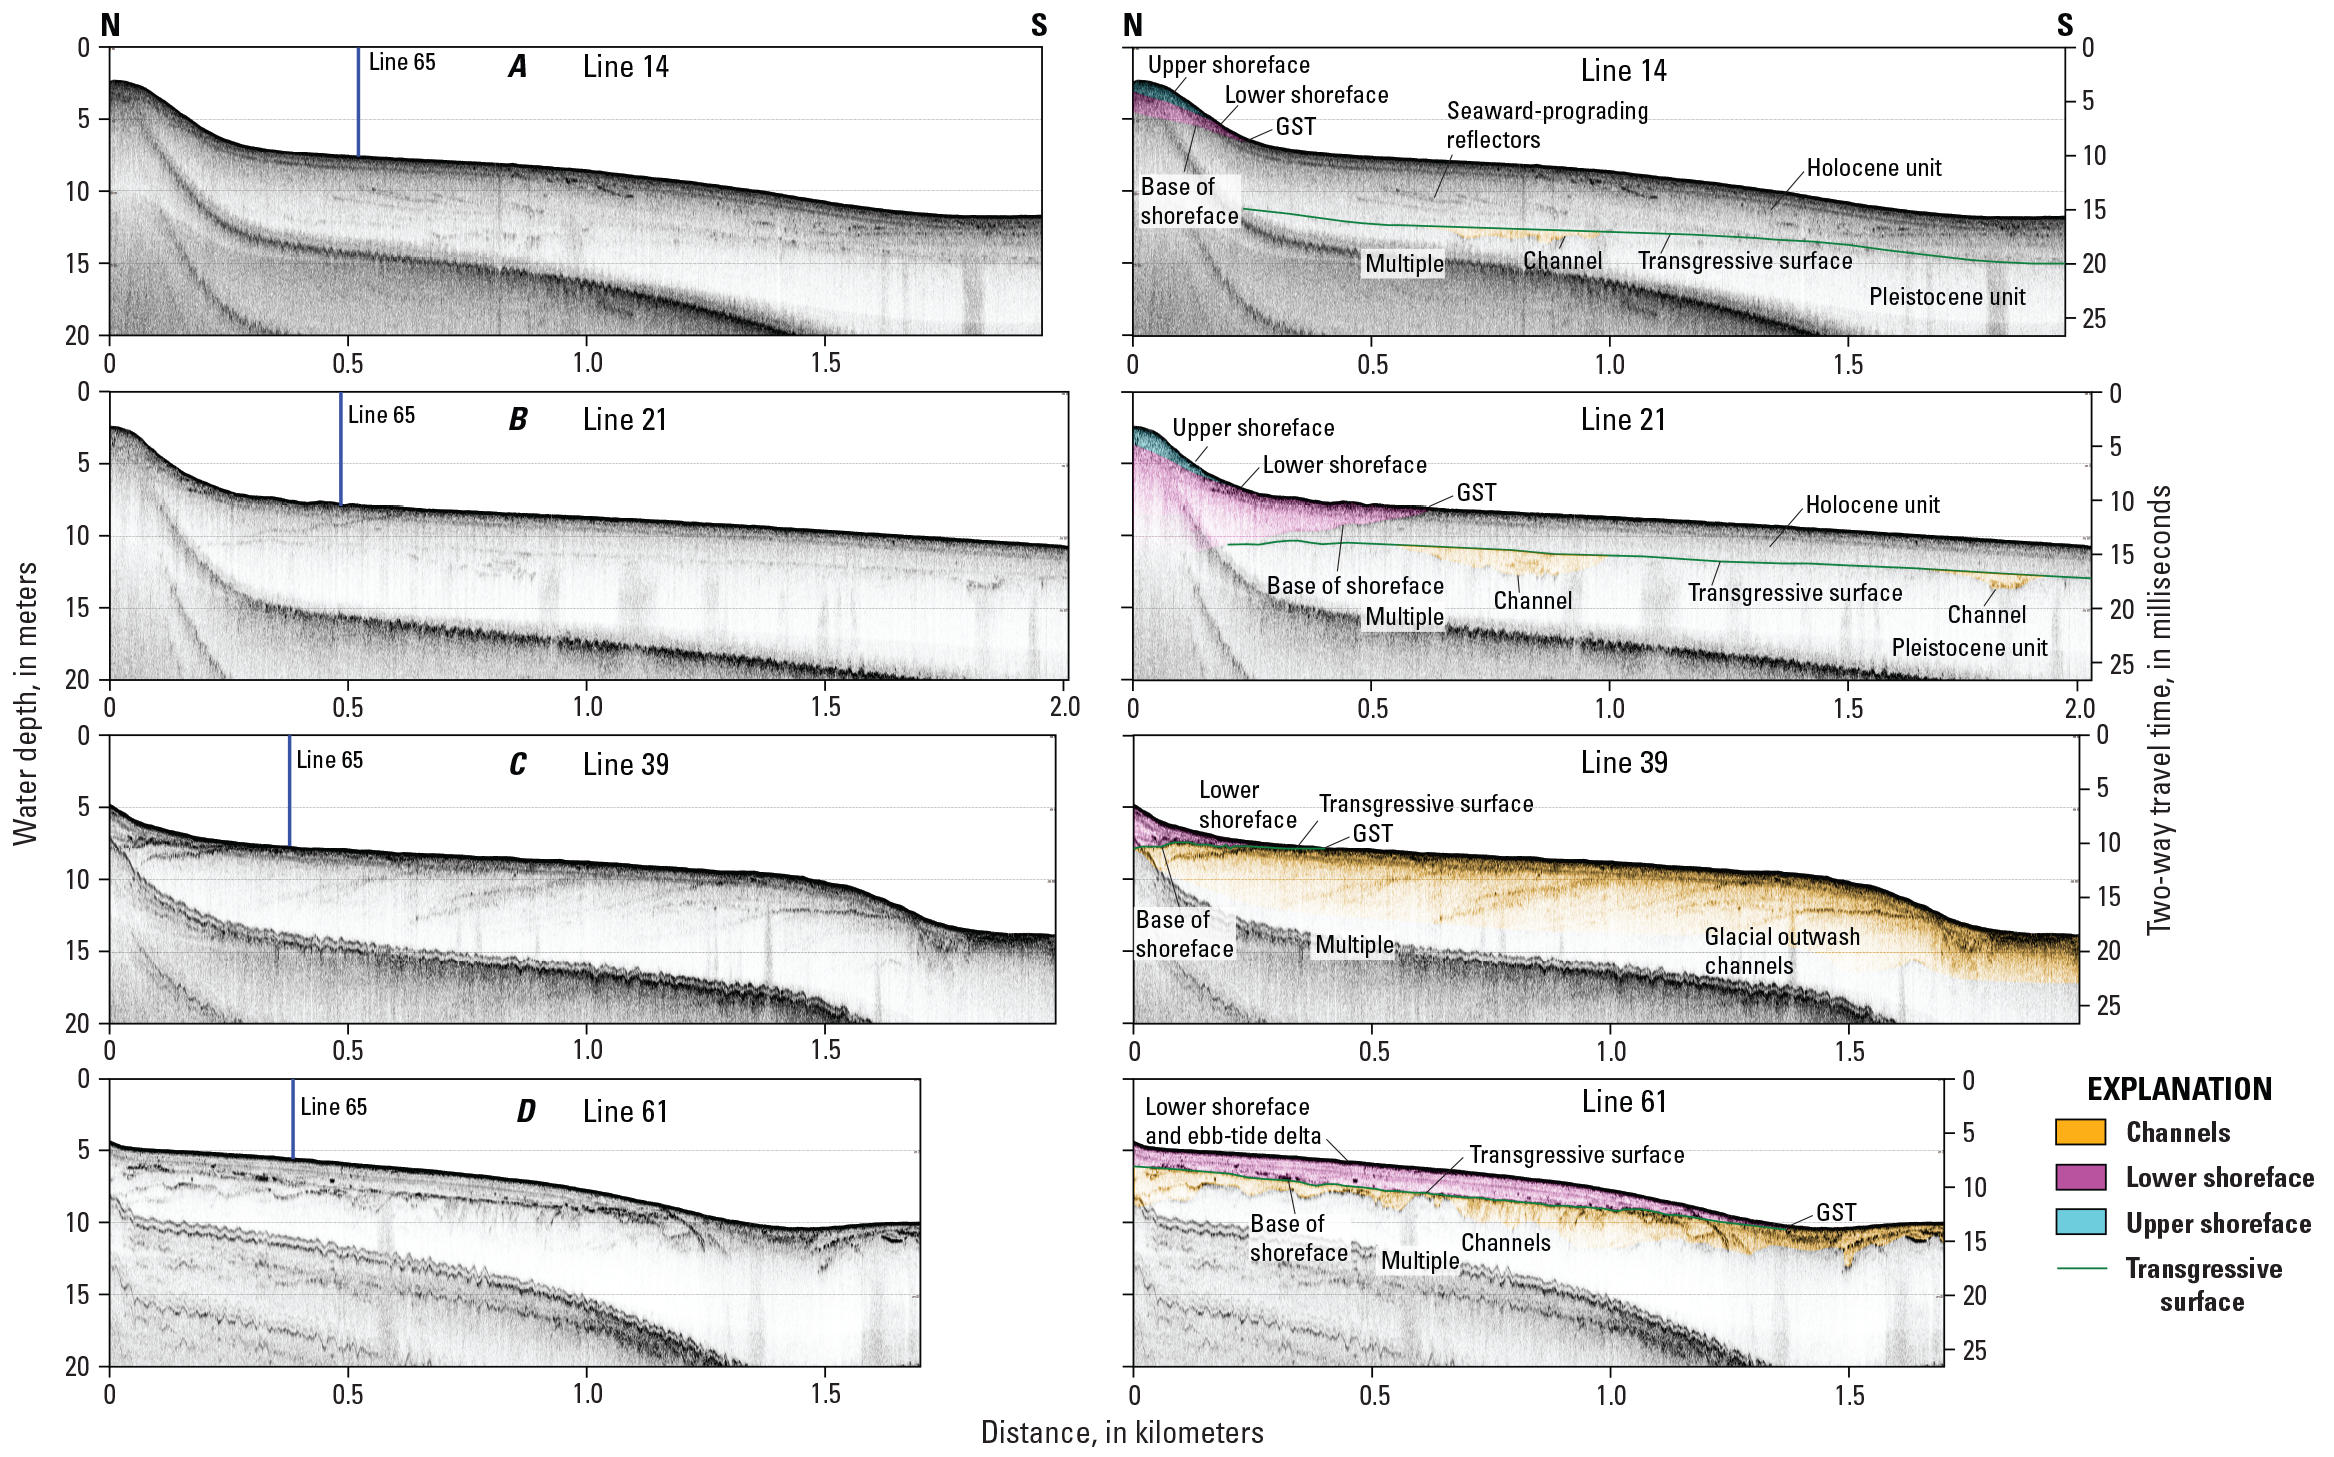 Profiles showing geometries of channel, lower shoreface, and upper shoreface sediment
                     units and the transgressive surface.